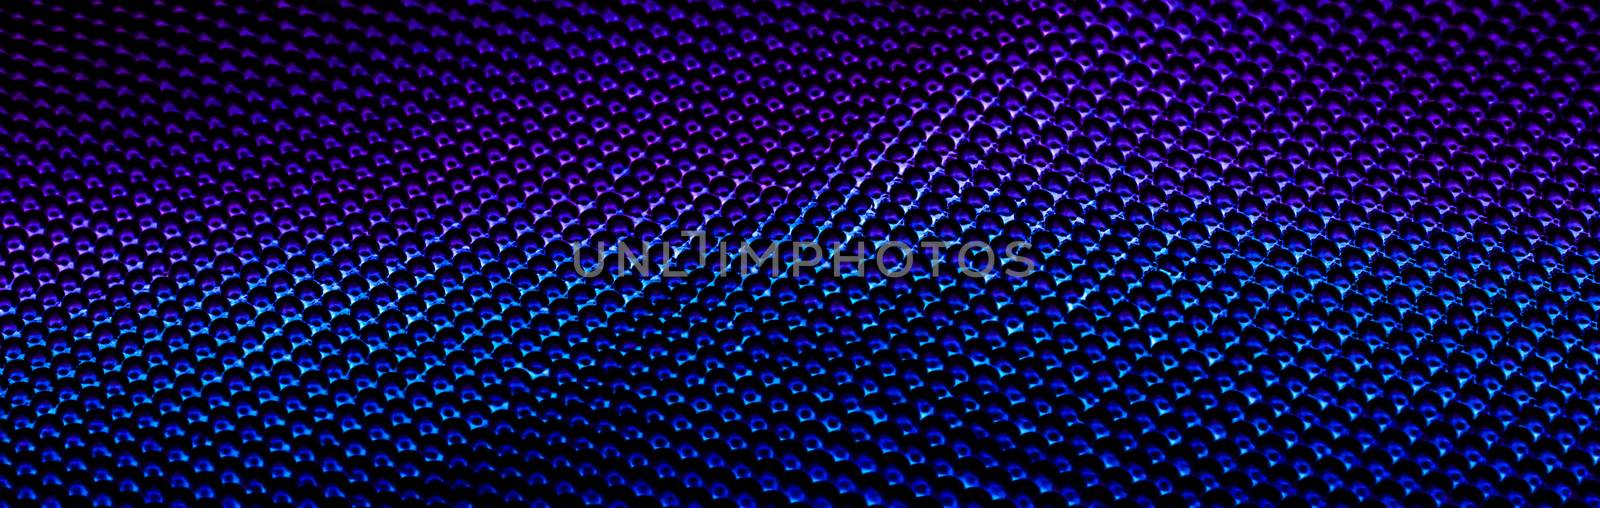 Purple metallic abstract background, futuristic surface and high tech materials